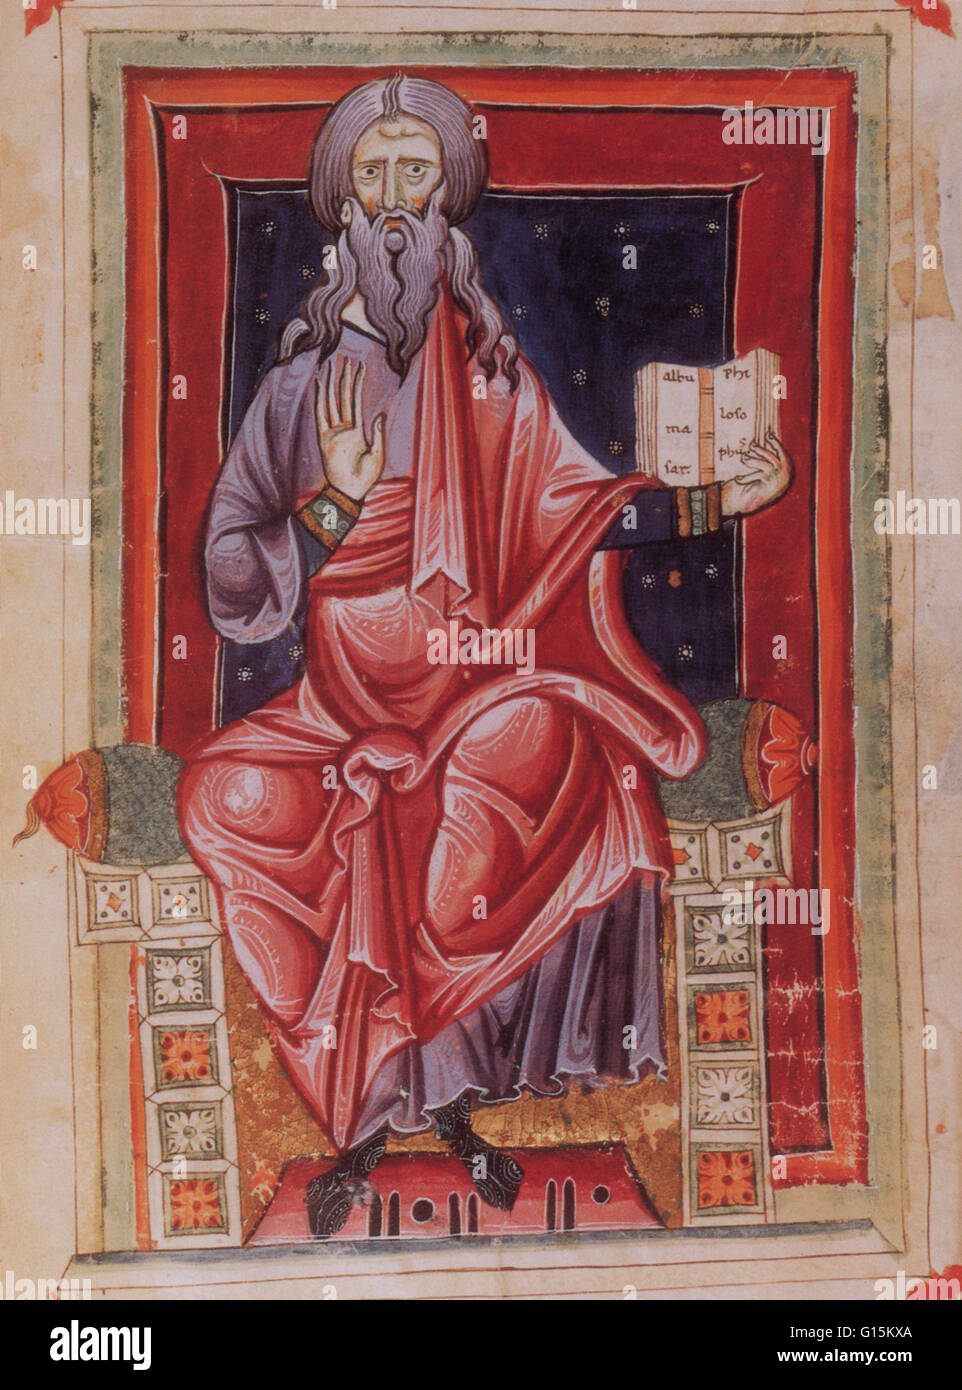 Portrait of Abu Mashar, the founder of Islamic astrology, whose theories concerning the power of planetary conjunctions were immensely influential in east and west. Stock Photo